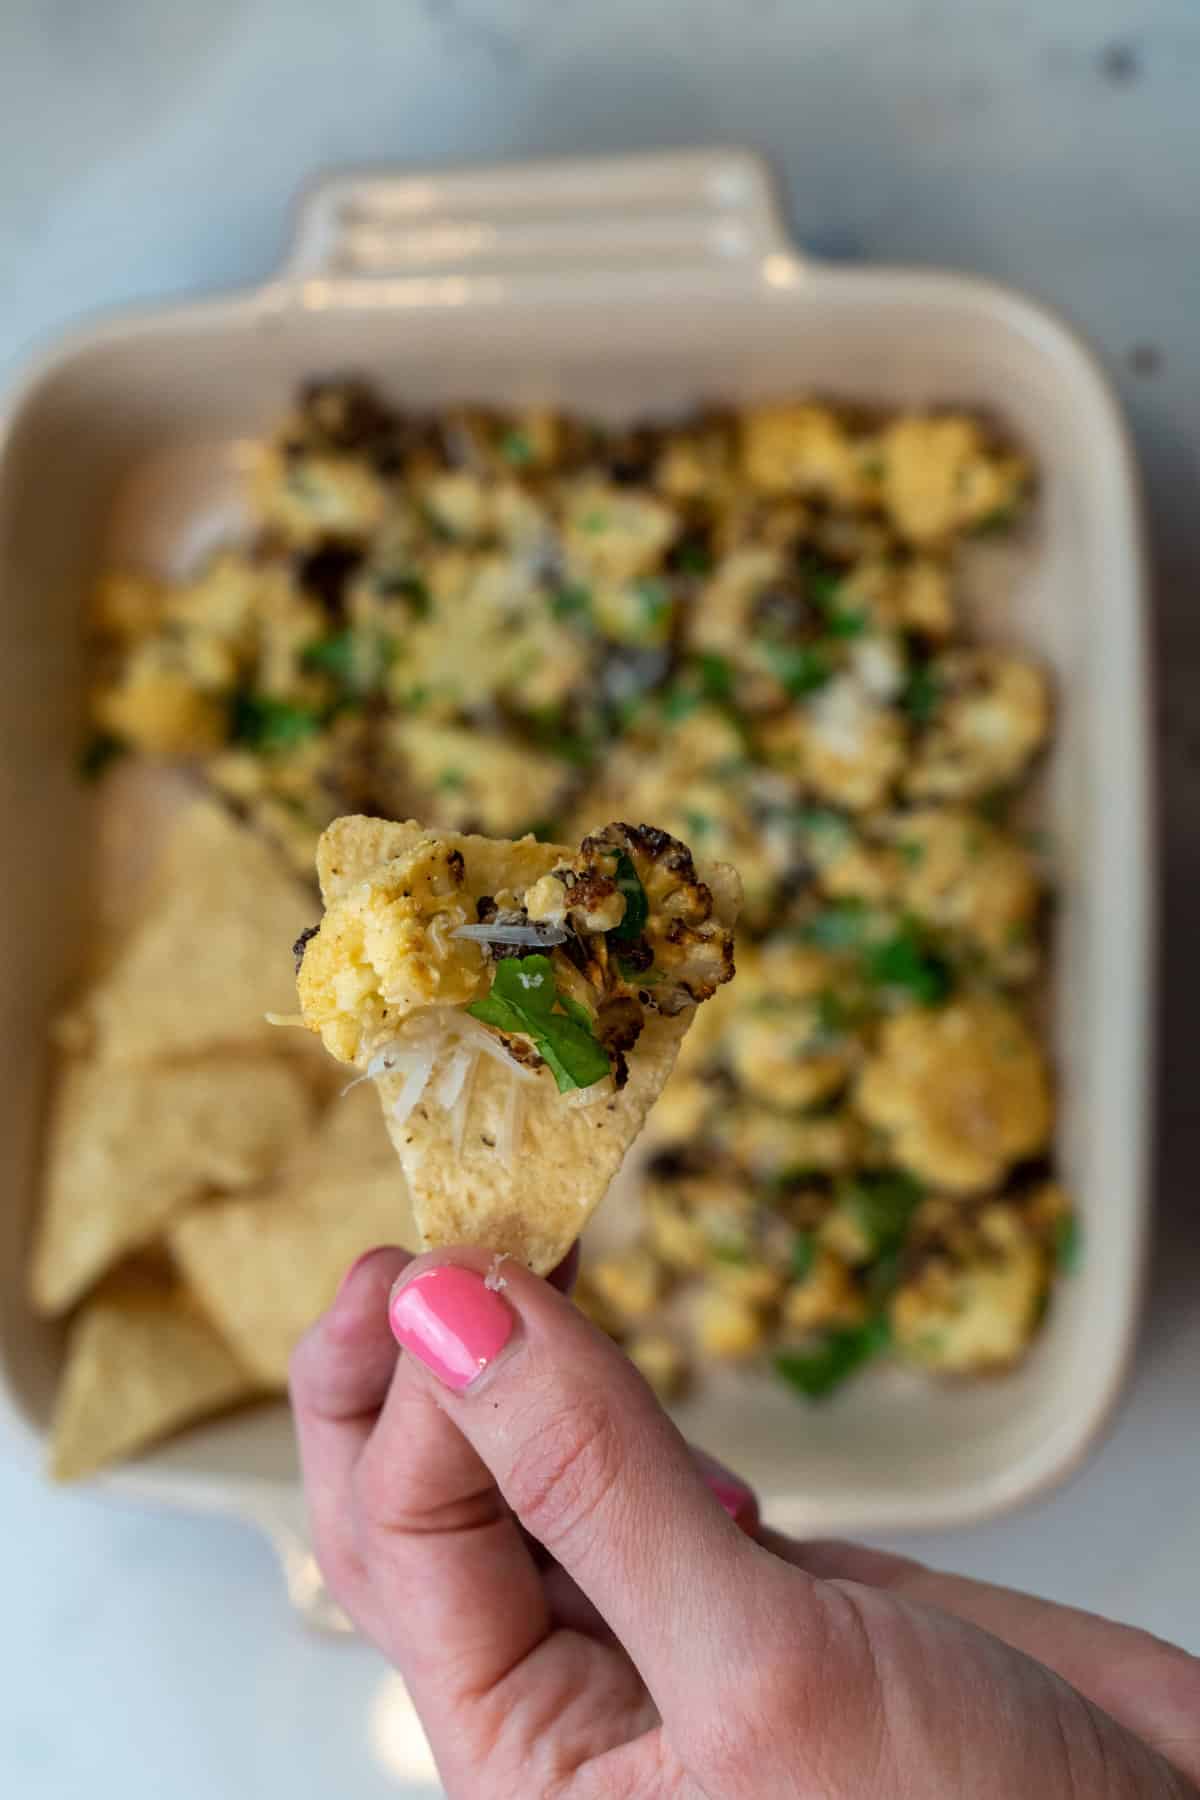 Plate the Mexican Cauliflower Elote (Keto and Gluten Free) and top with the extra cheese and cilantro. Serve with tortilla chips.